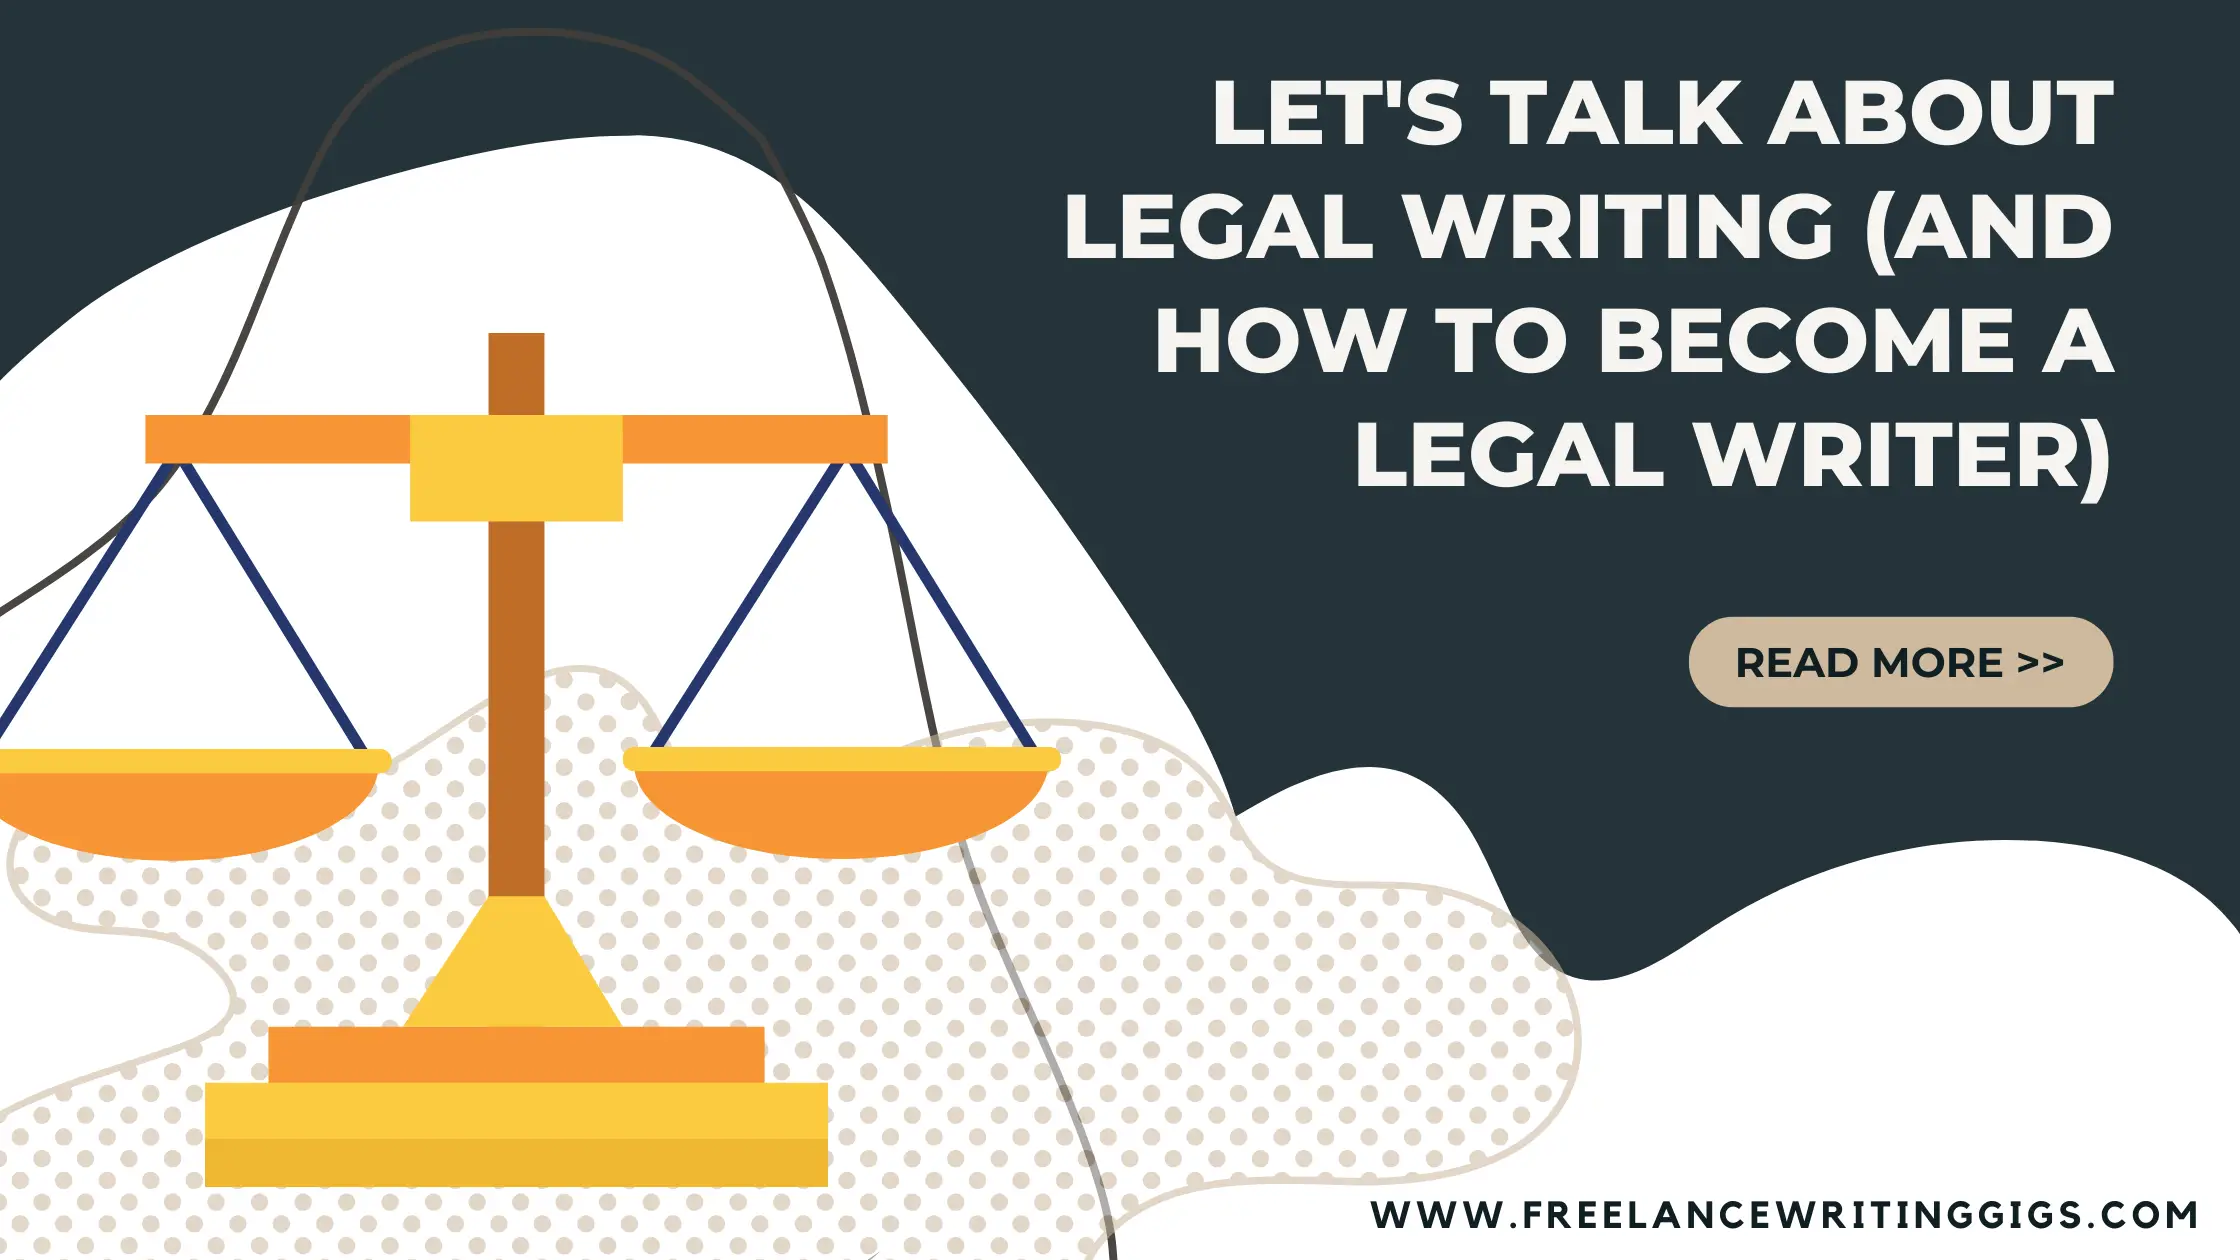 Let’s Talk About Legal Writing (and How to Become a Legal Writer)